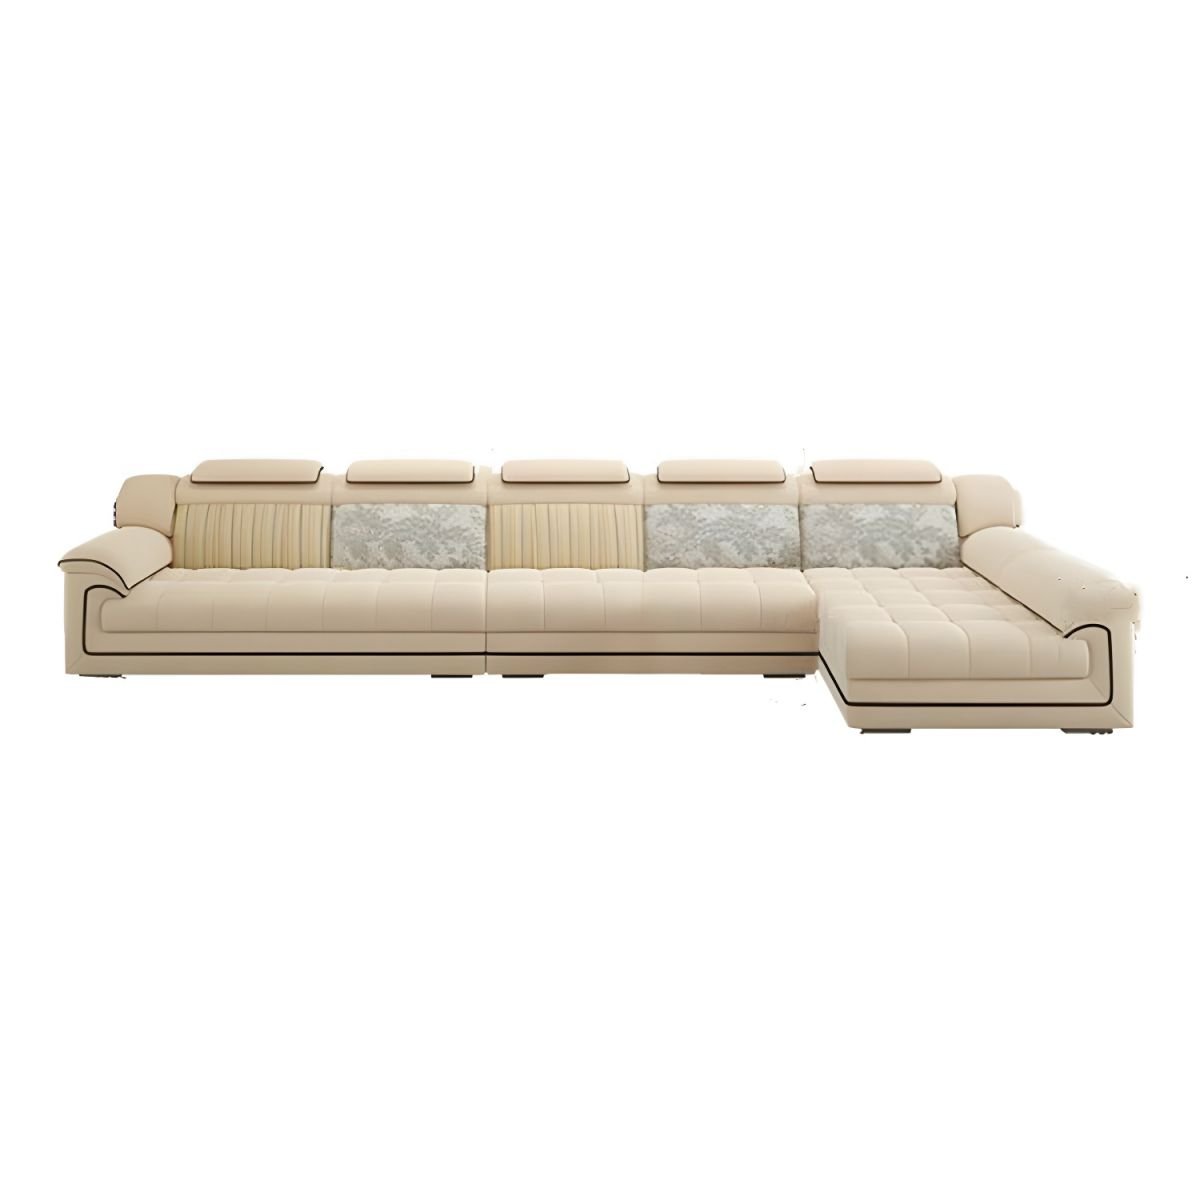 Contemporary L-Shaped Sofa & Chaise in Off-White with Pillow Top Arm - 170"L x 69"W x 41"H Flannel